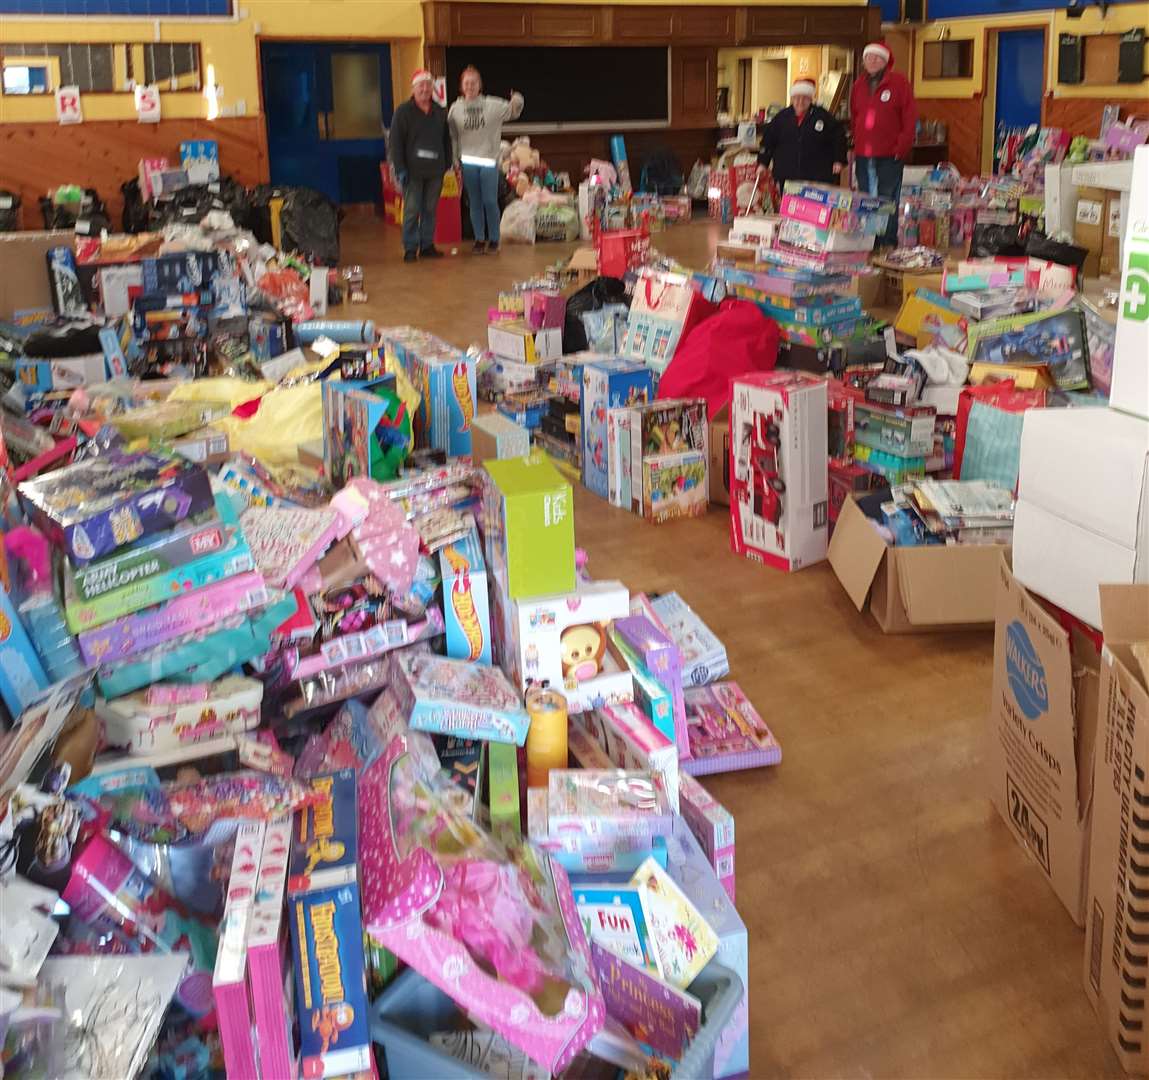 Some of the many gifts collected by Caithness FM in its Toy Appeal this year.